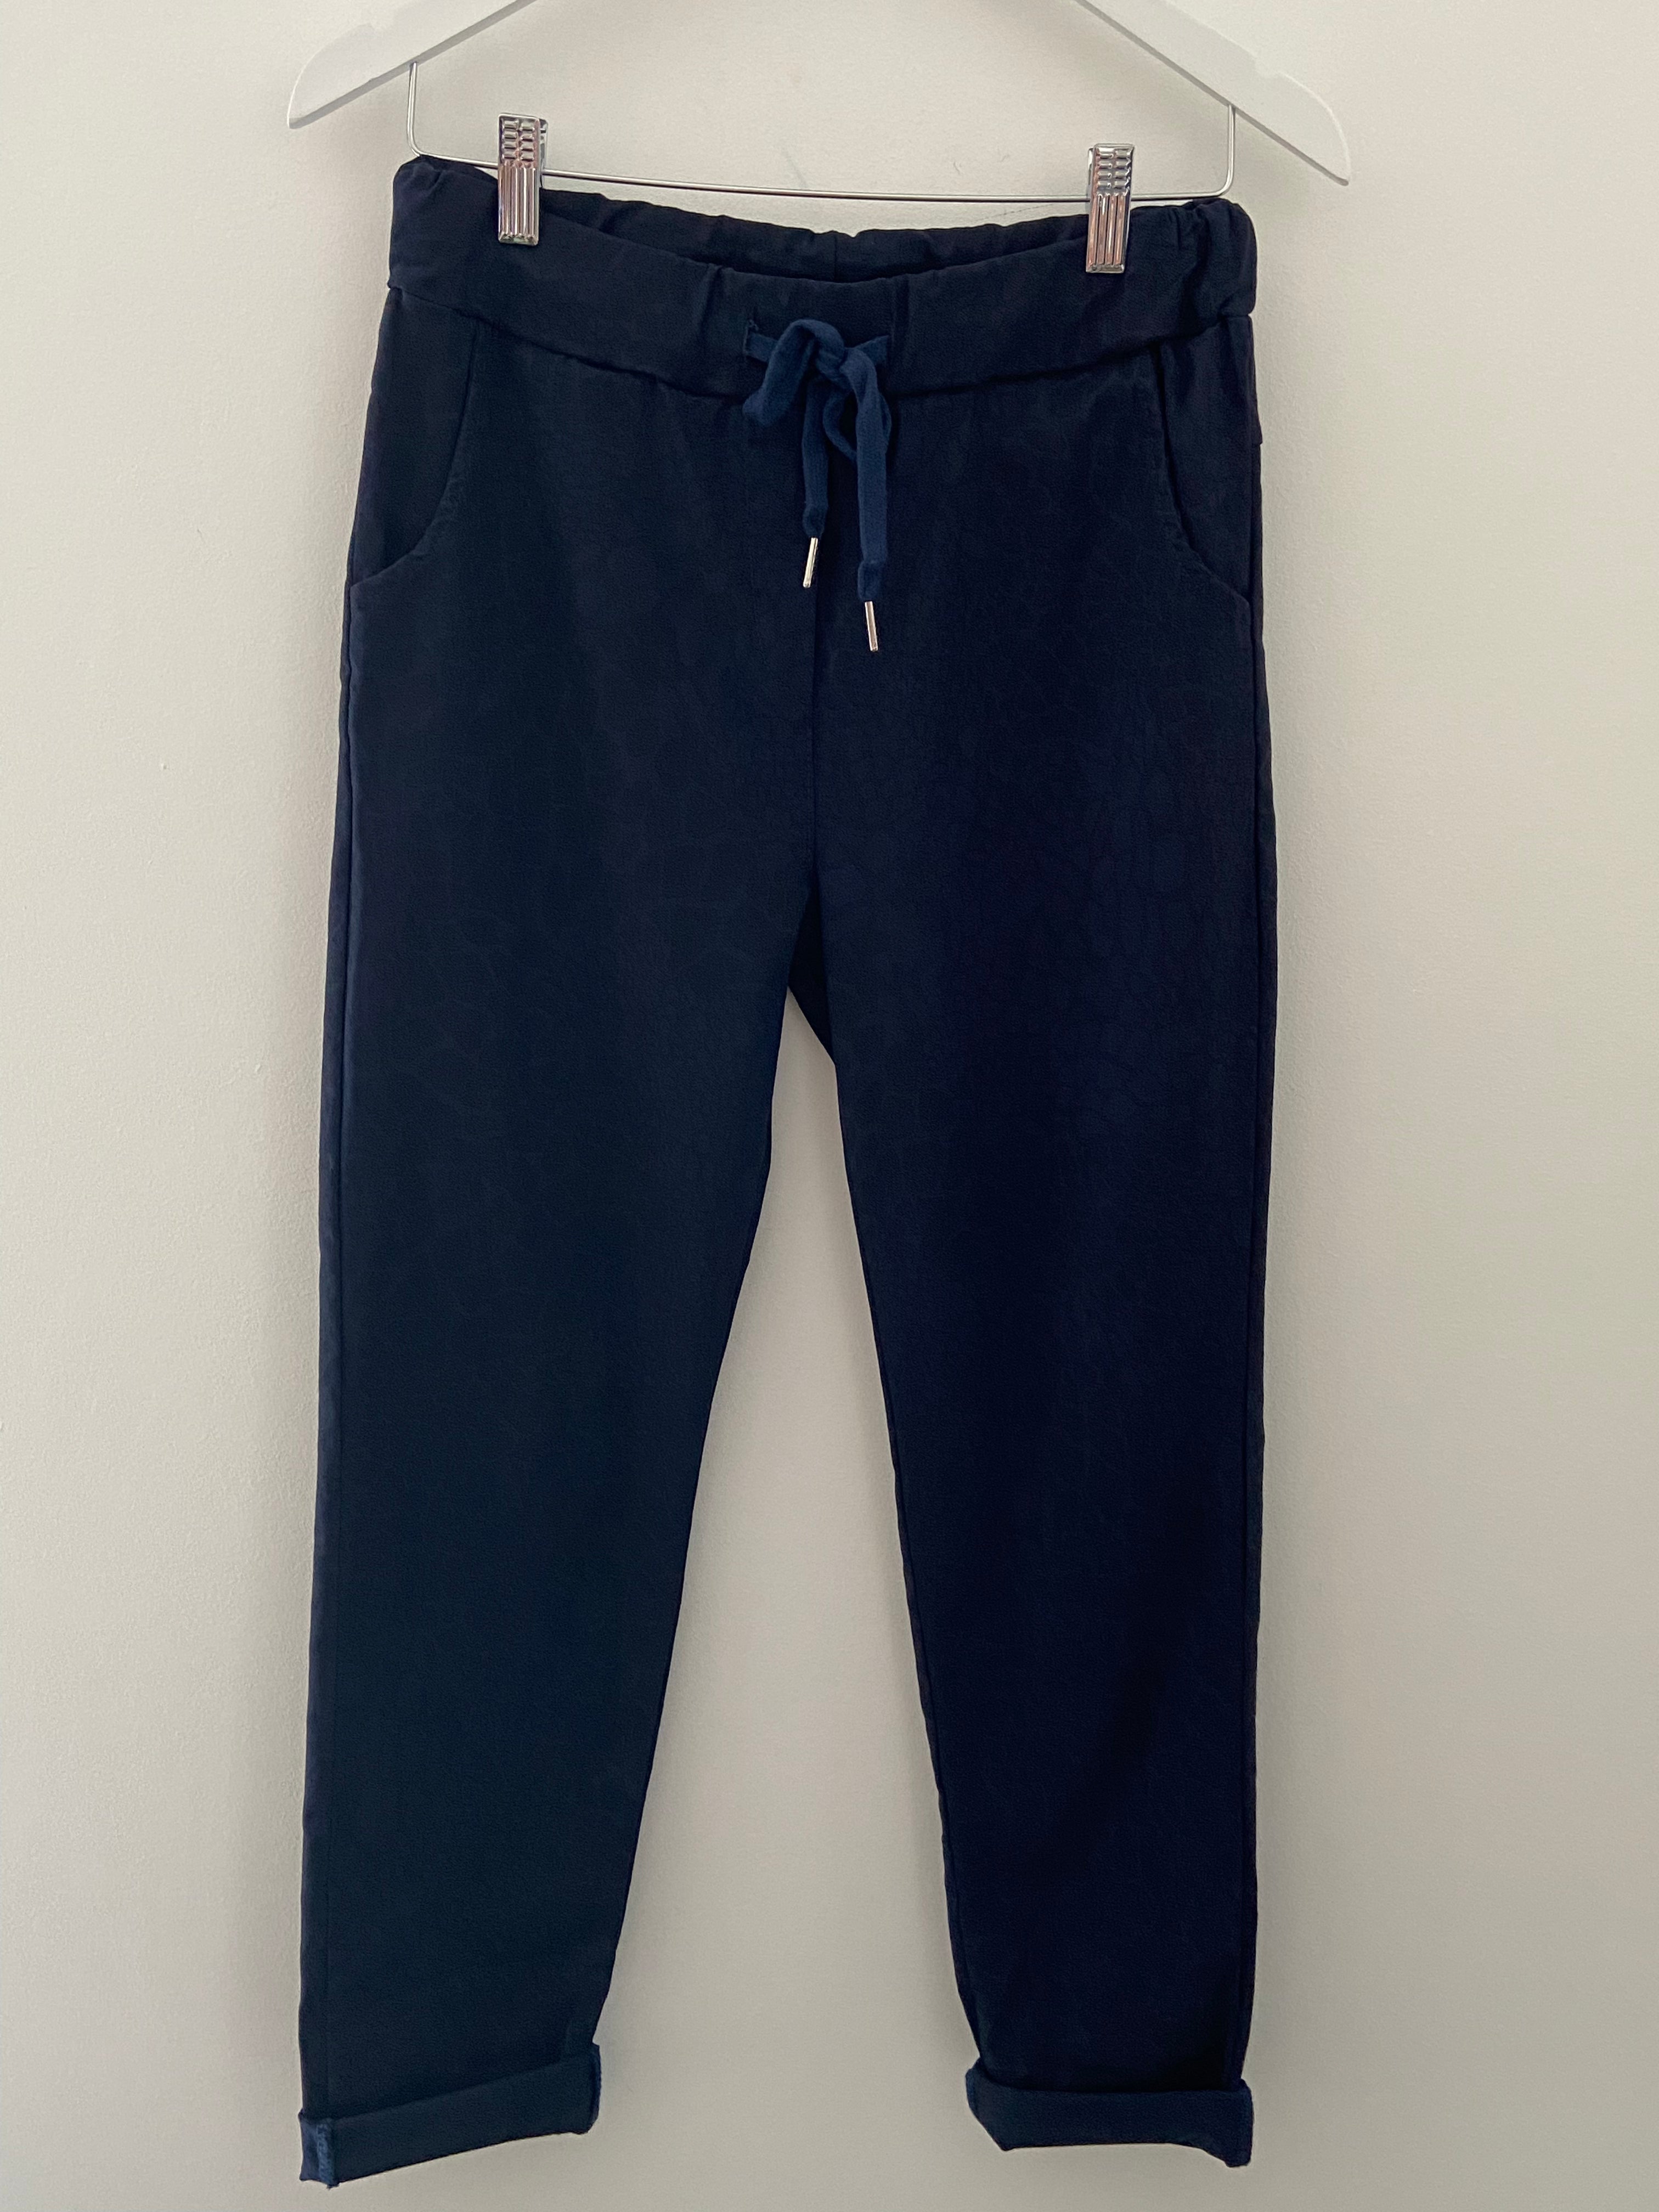 Super Stretch Joggers in Ink Pebble